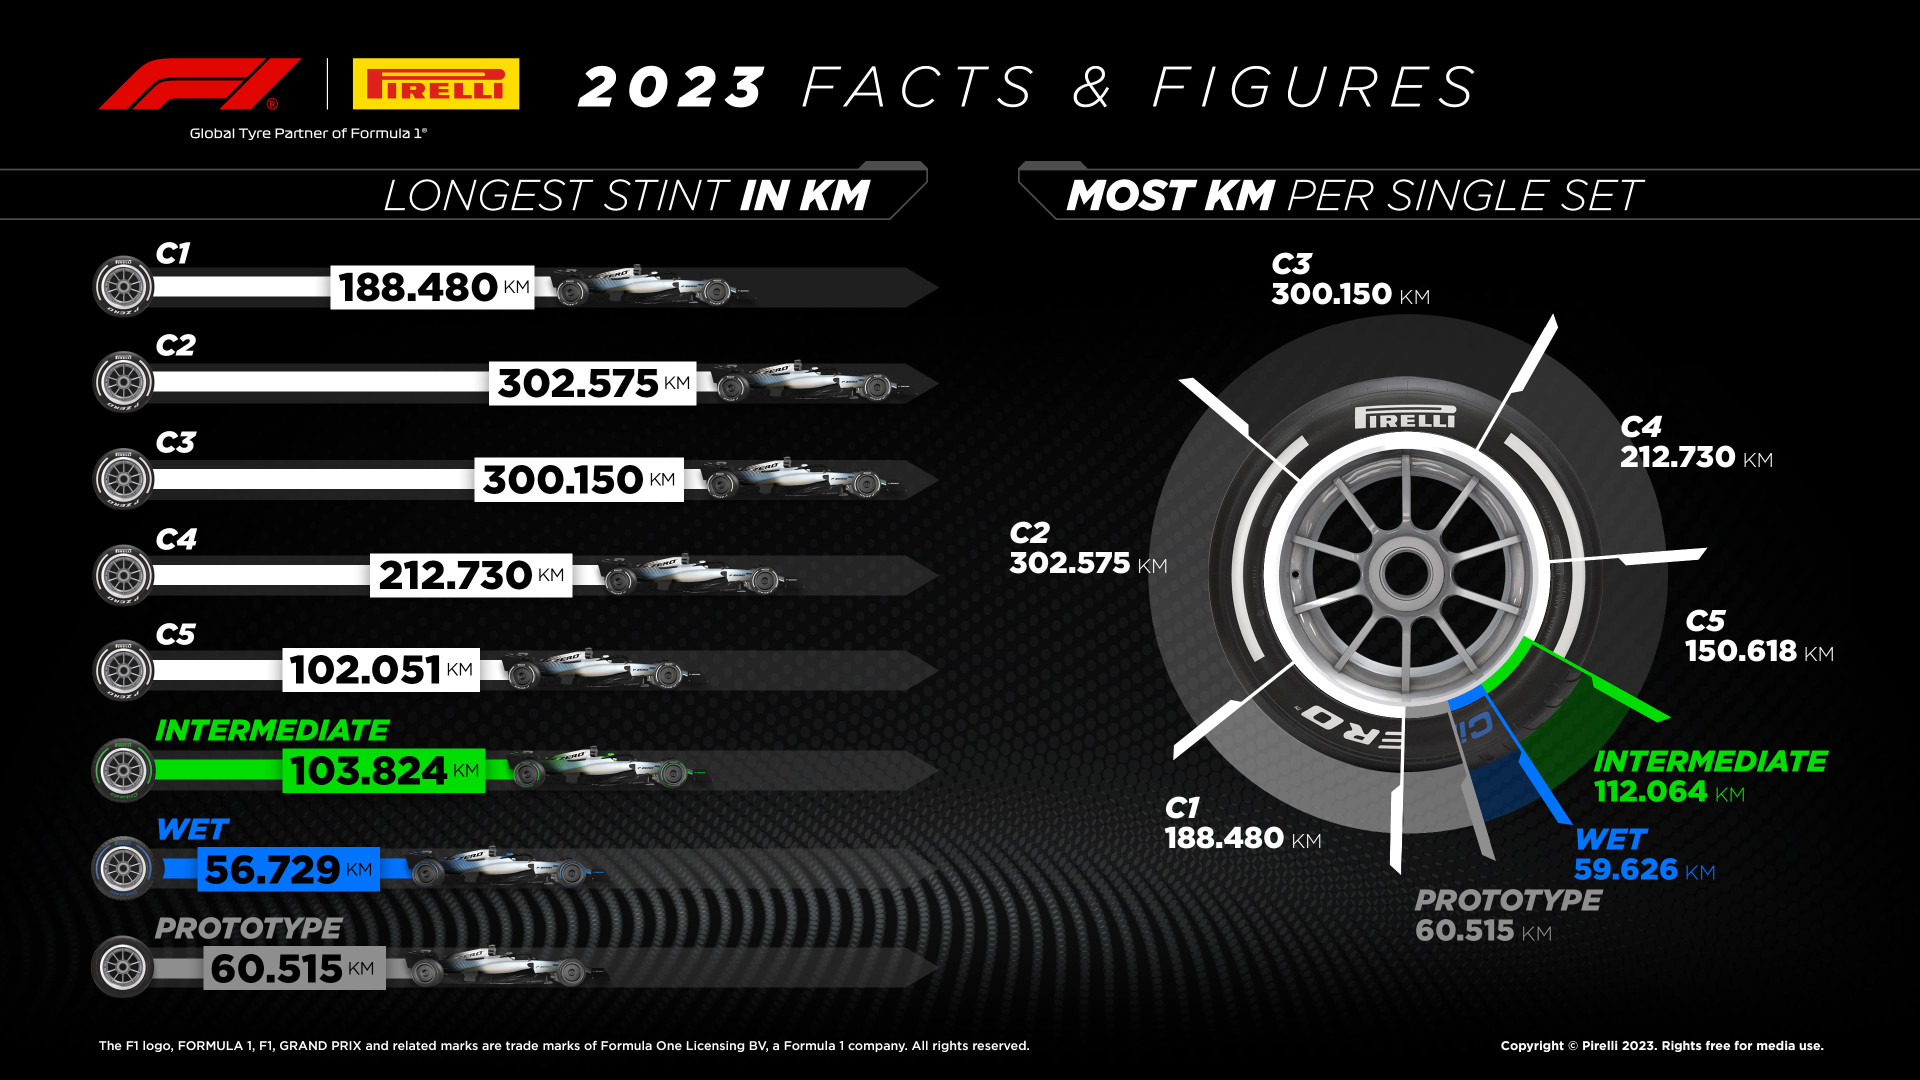 2023 Facts and Figures - Longest Stint and Most KM per Set